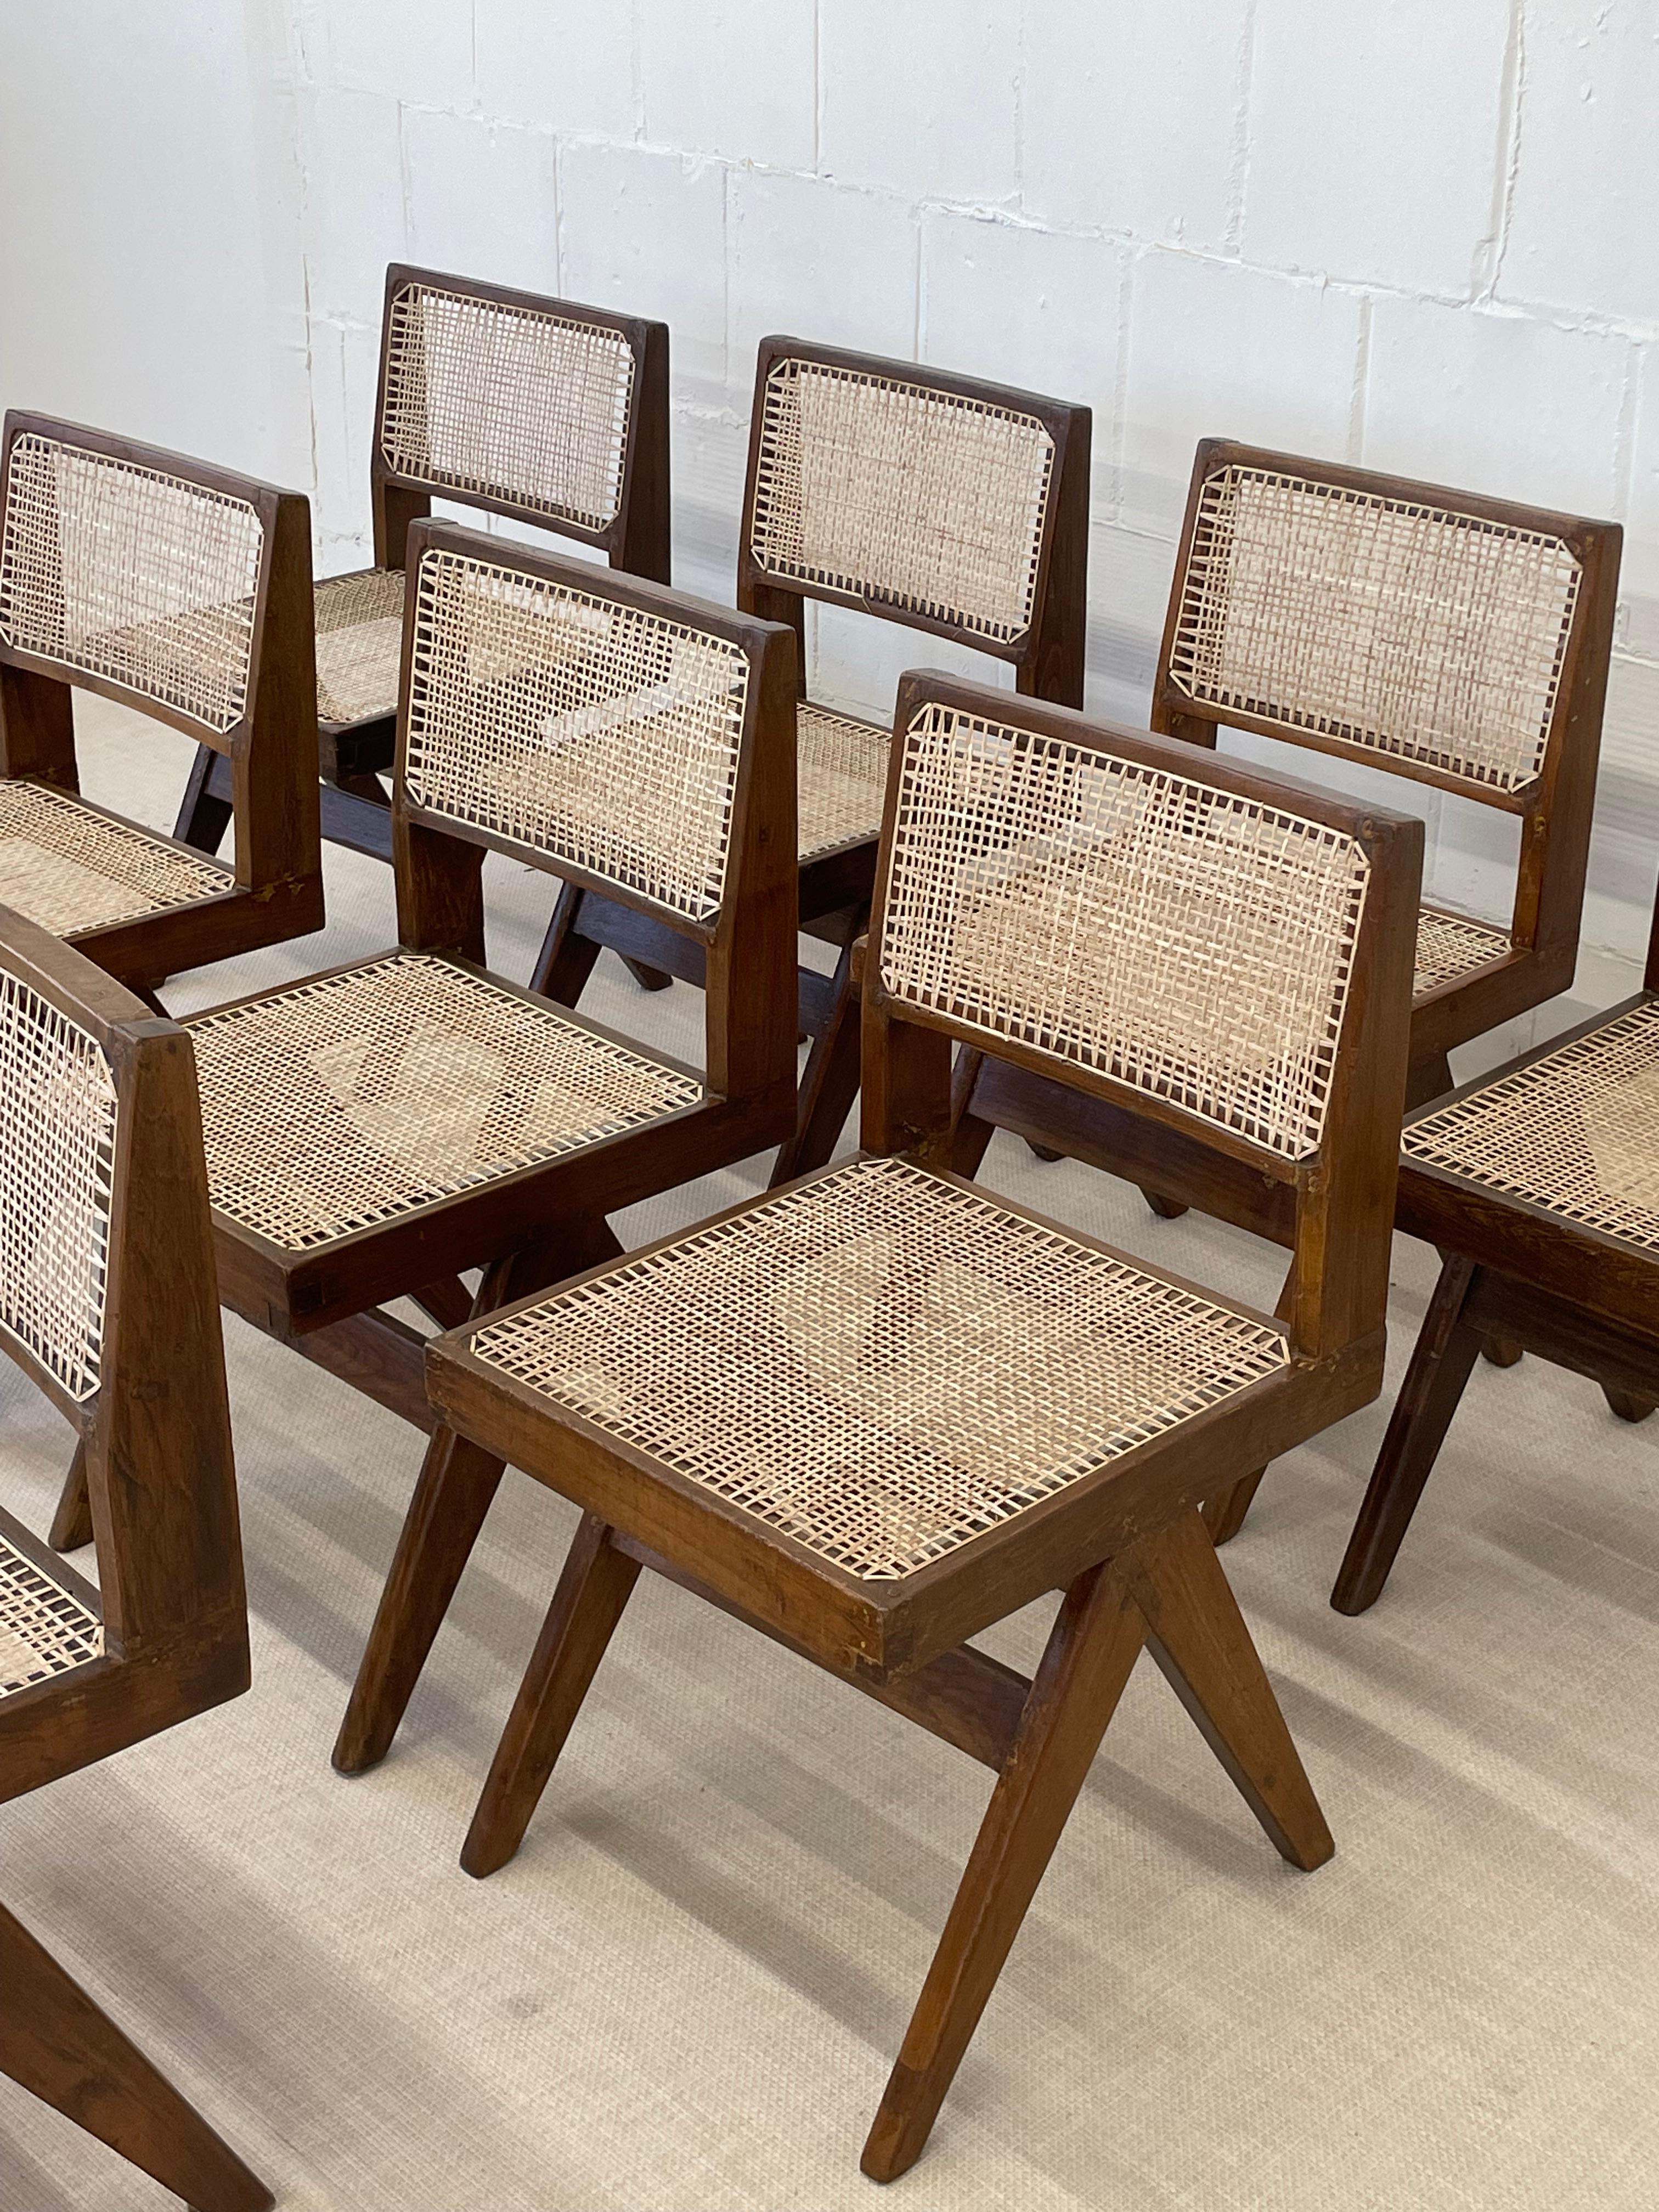 Caning 10 Pierre Jeanneret Armless Dining Chairs, Teak, Cane, France/India